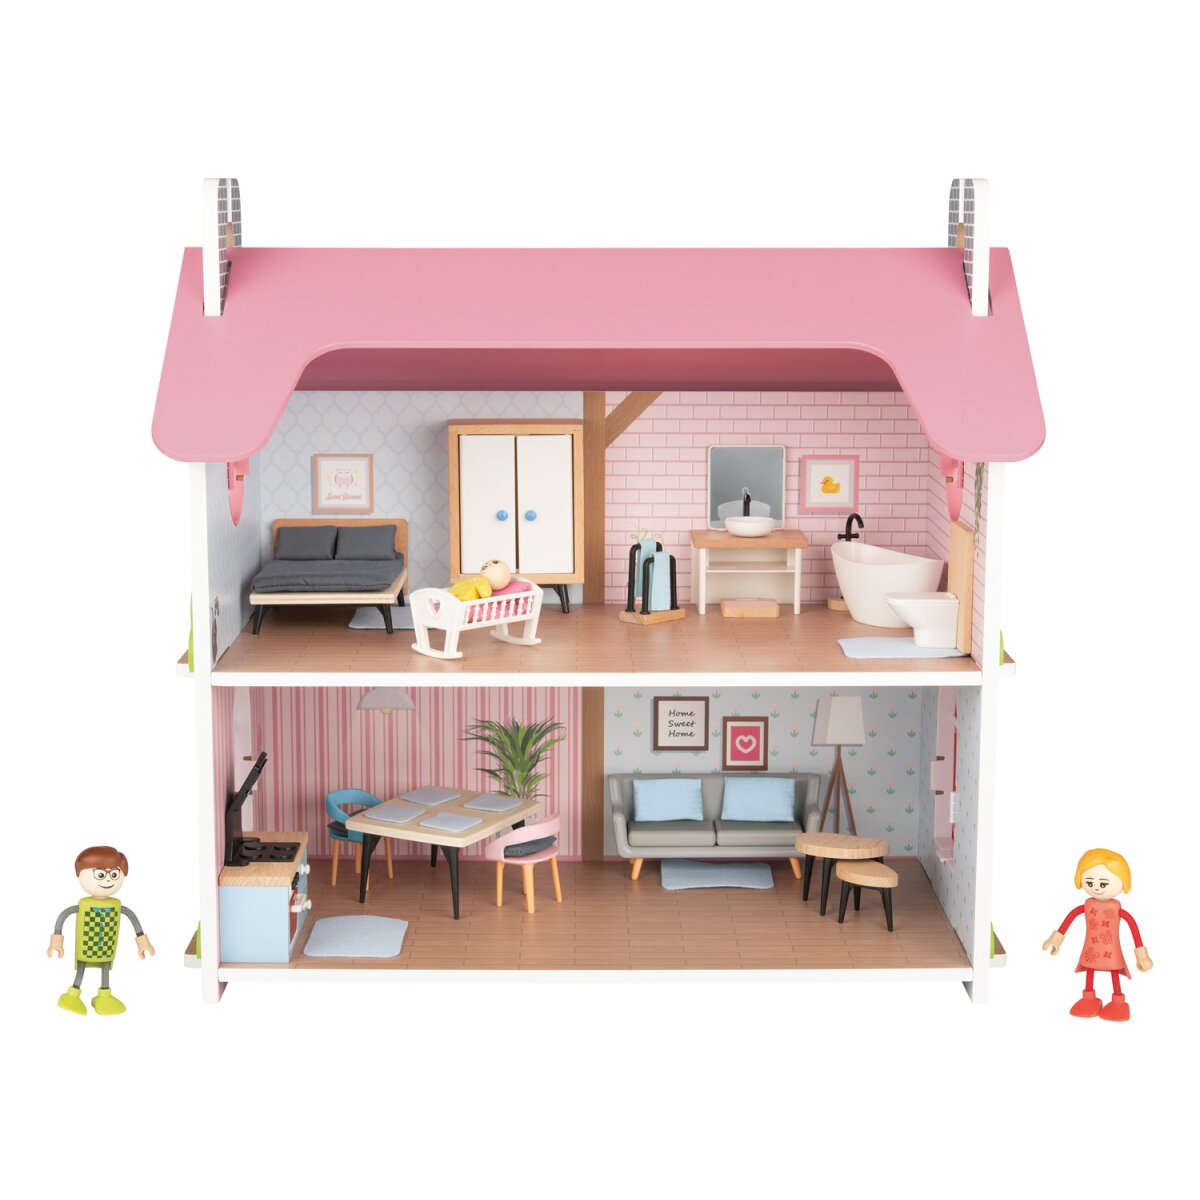 Playtive Holz Puppenhaus, 41-teilig, abnehmbares Dach - B-Ware sehr gut,  26,99 €